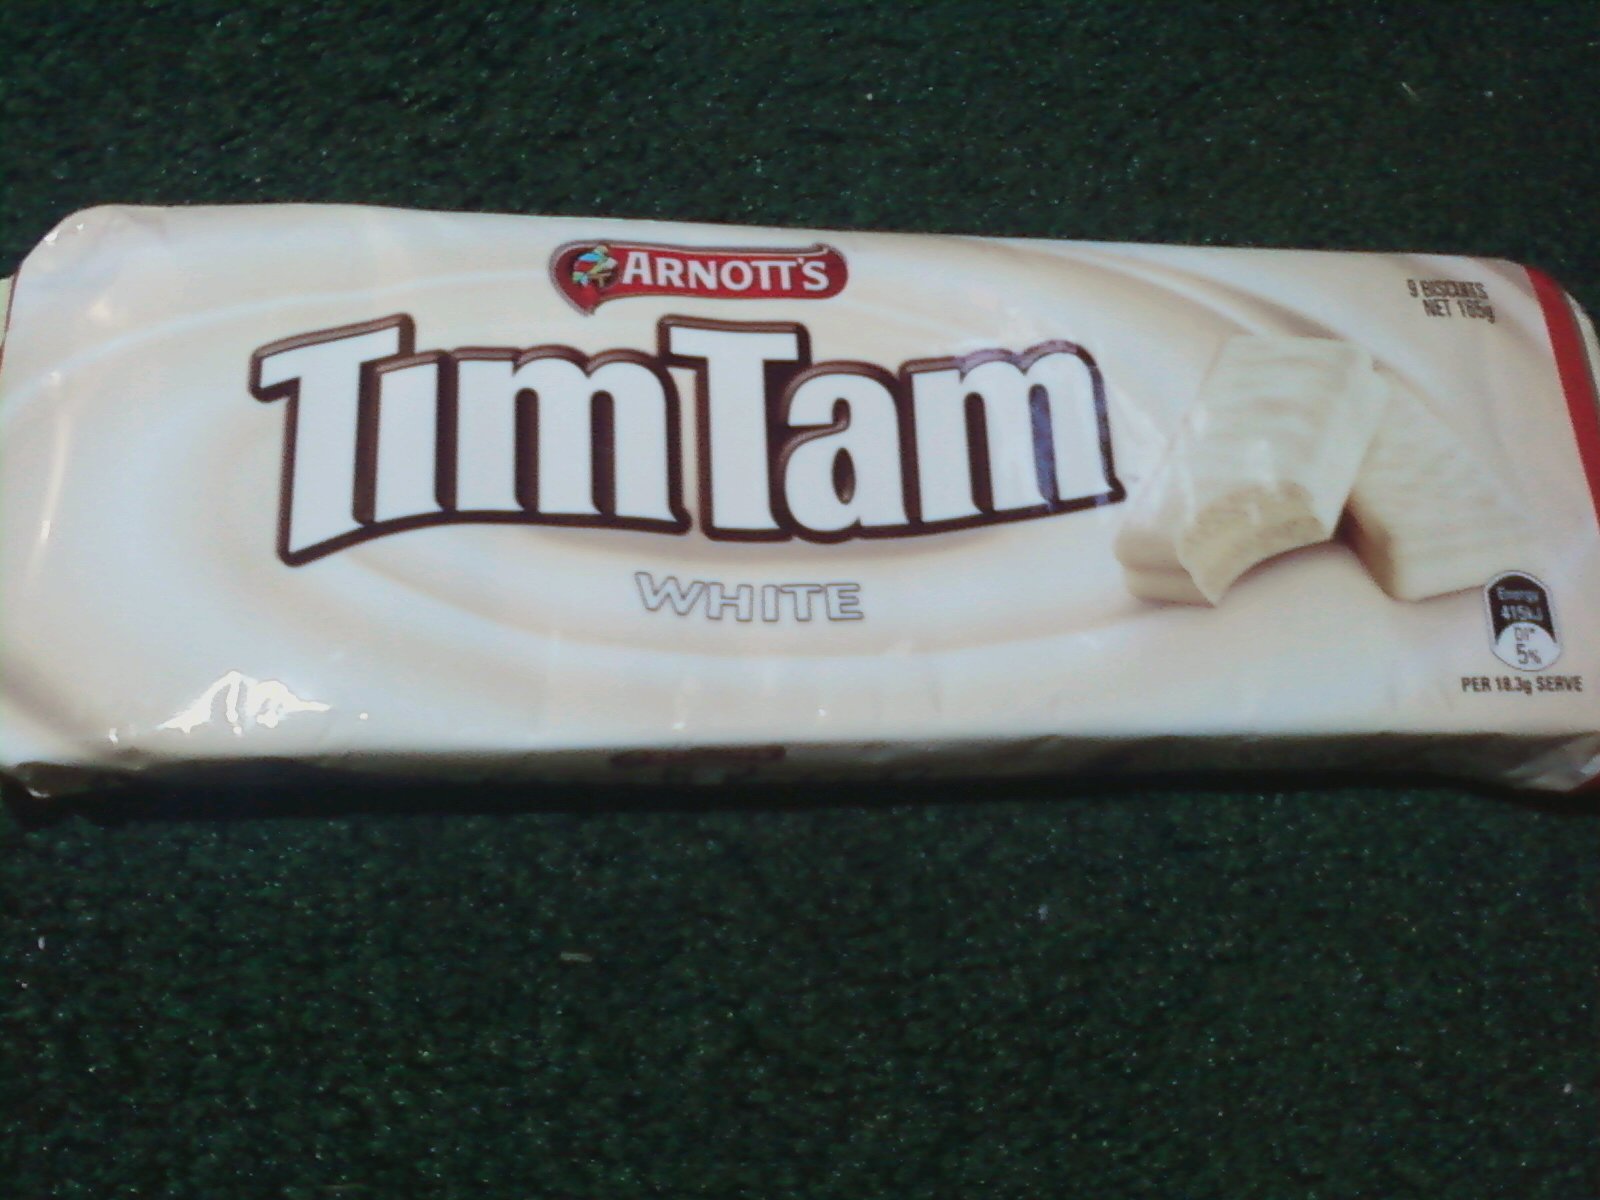 Attached picture 5816072-timtam.jpg